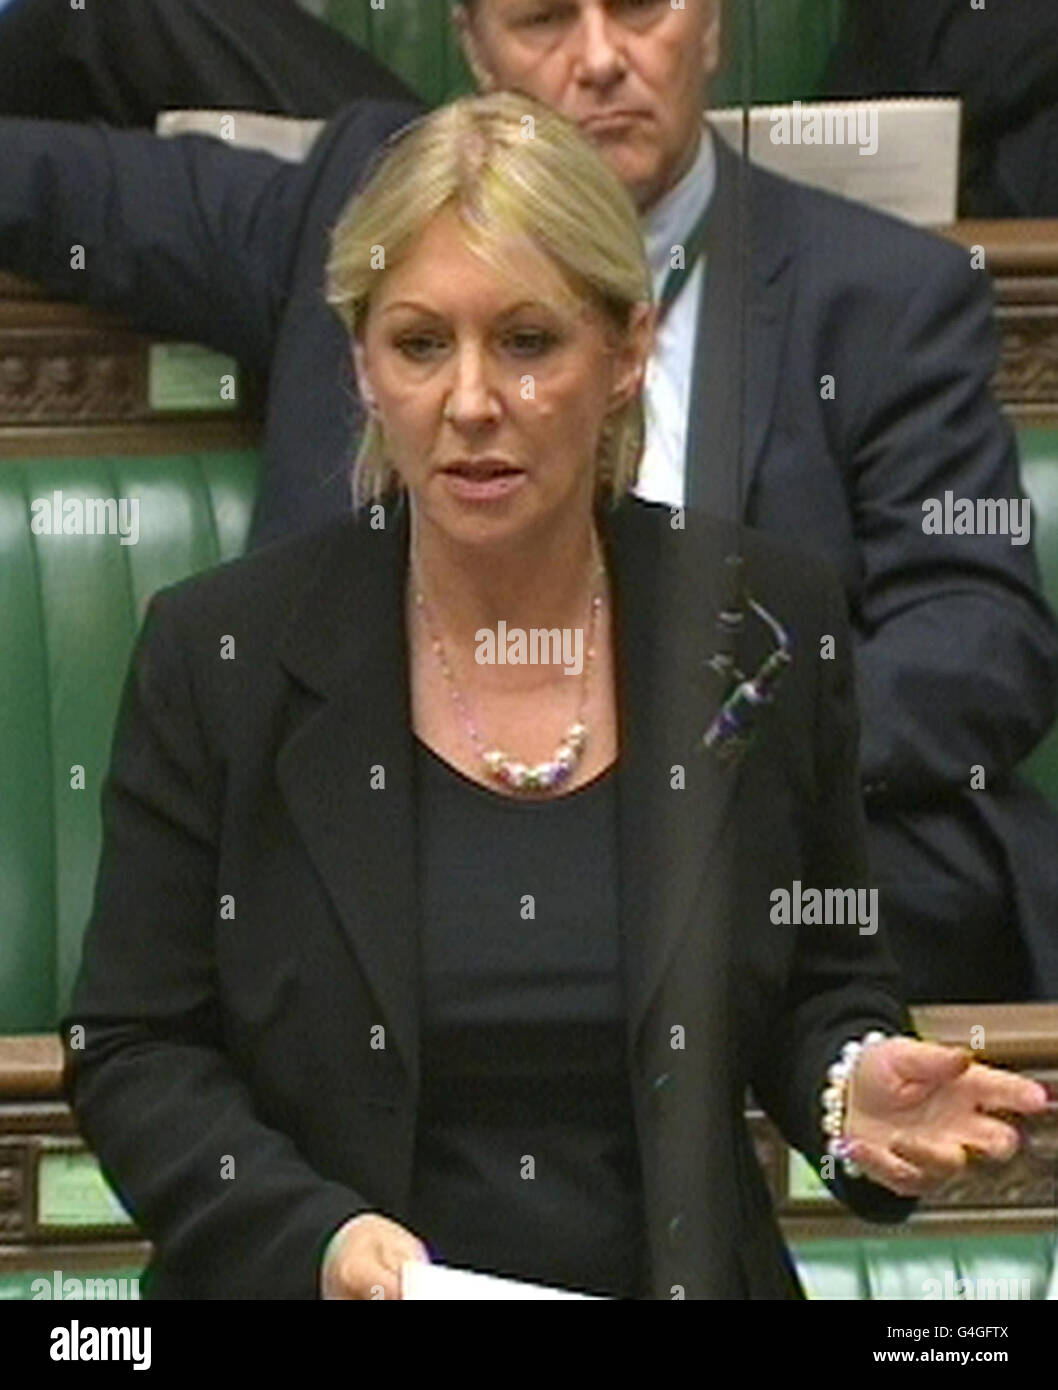 Conservative backbencher Nadine Dorries speaks in the House of Commons, London, during a debate over plans to bar abortion providers from giving advice to pregnant women. Stock Photo